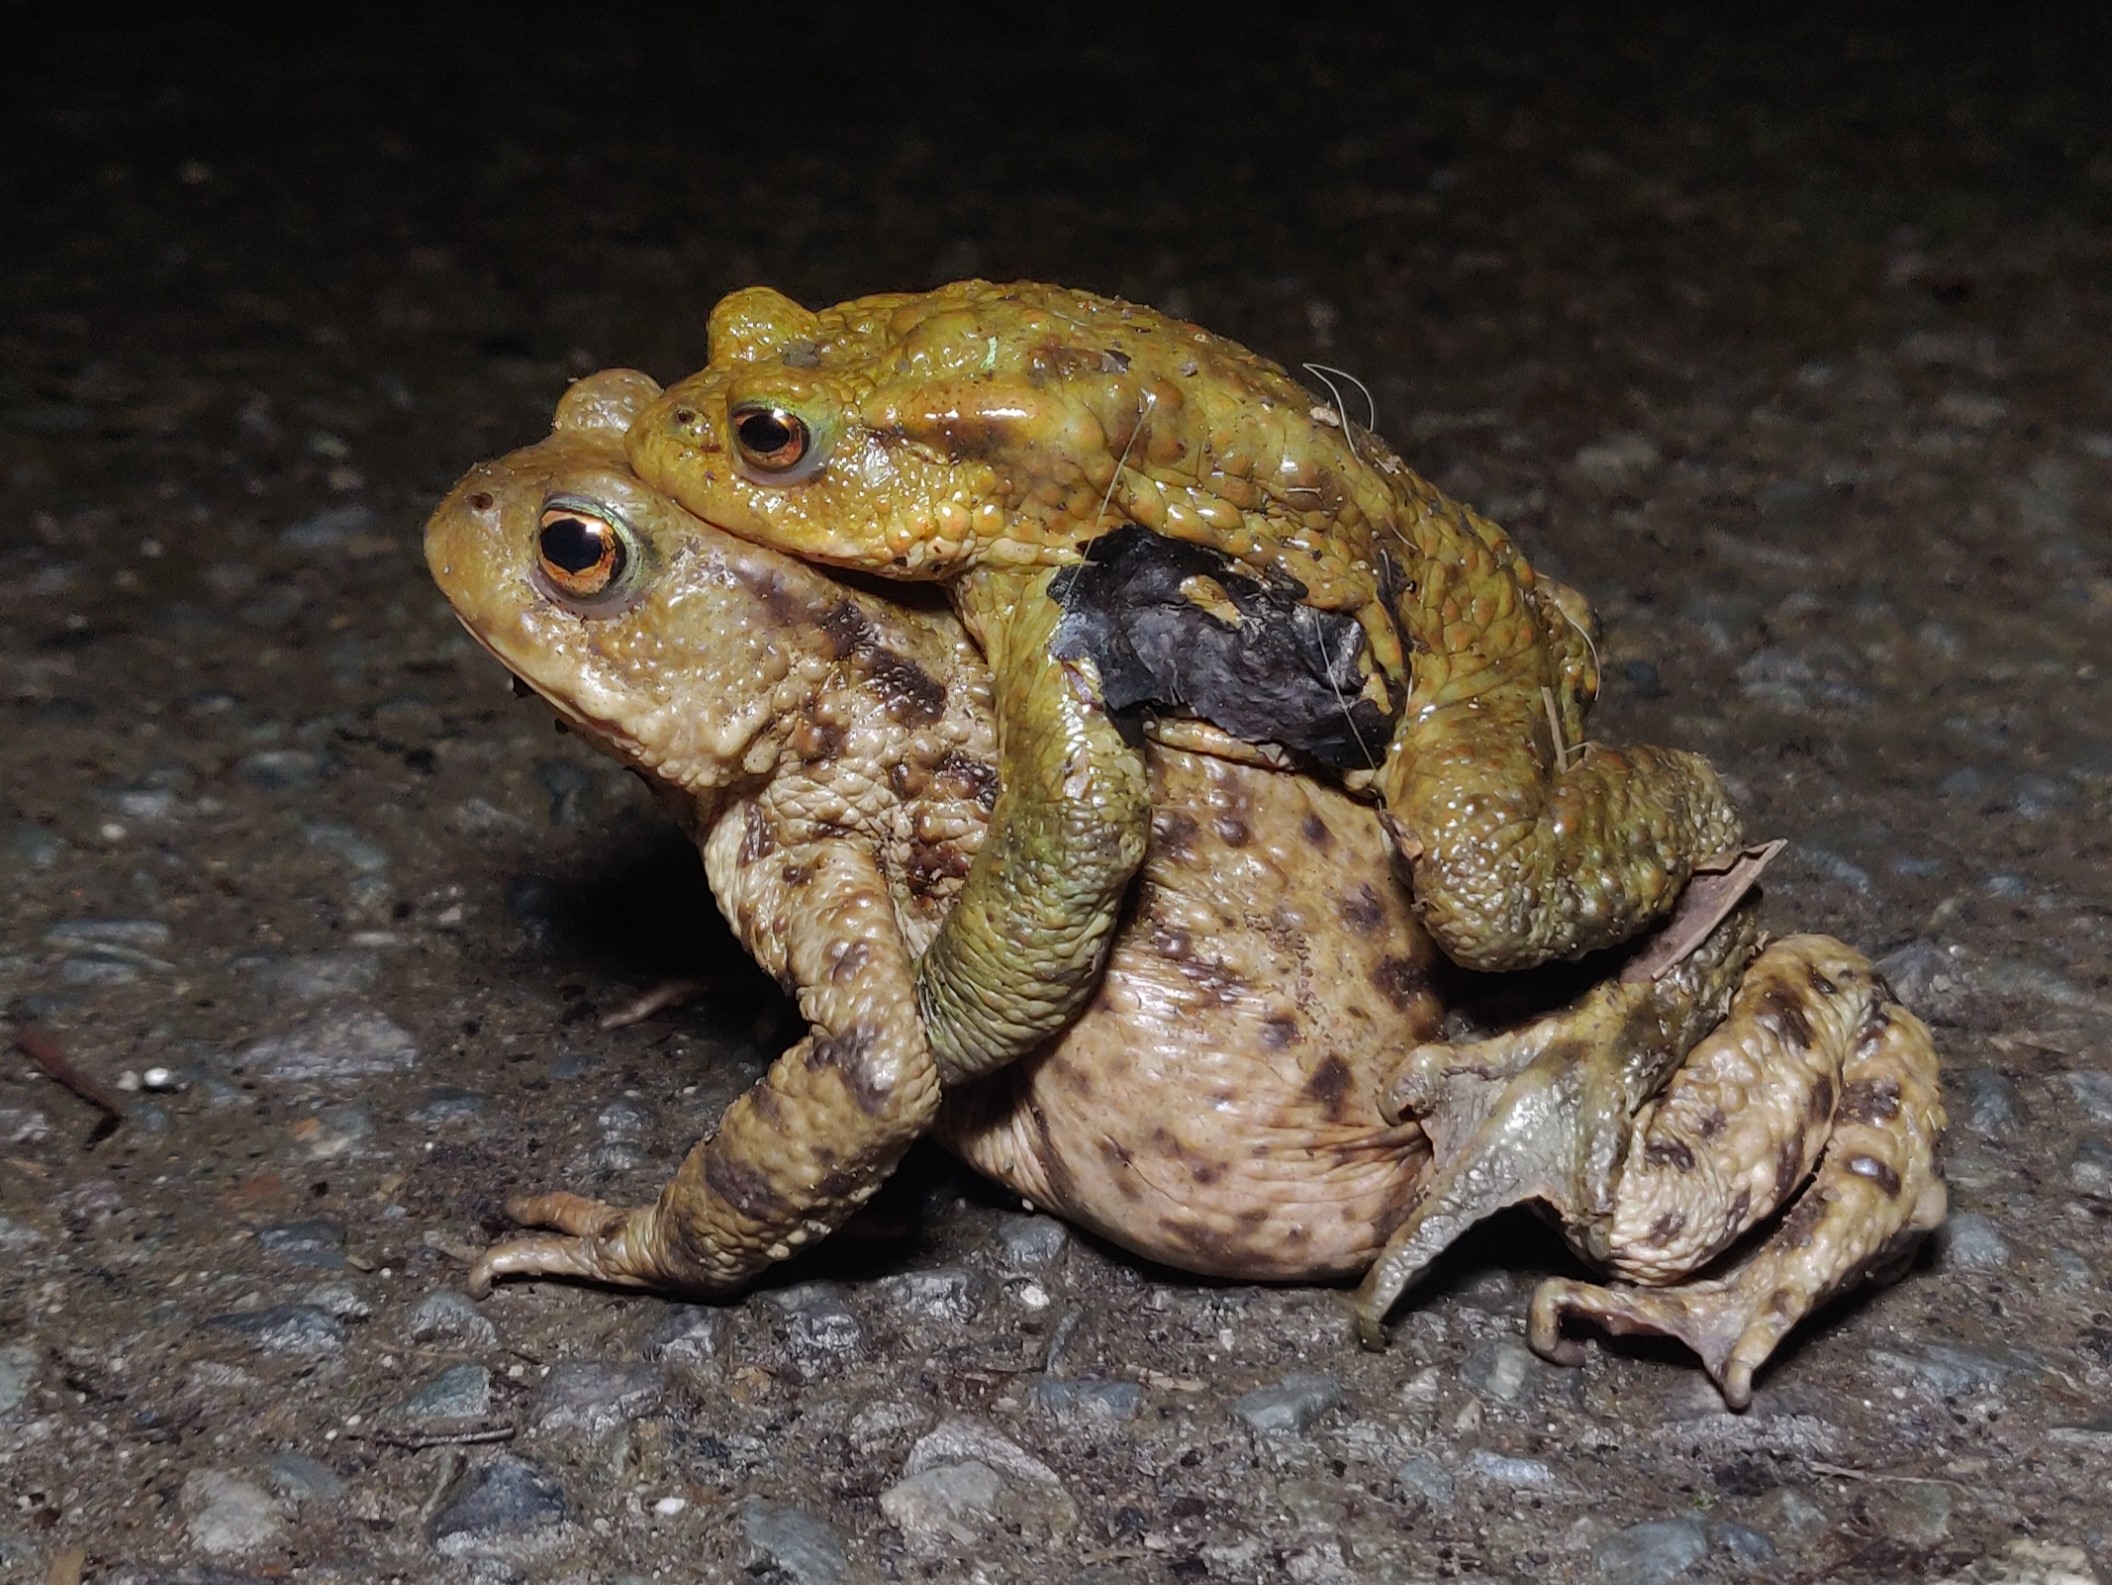 Close up of two toads, one on the back of another, crossing a gravelly road at night.